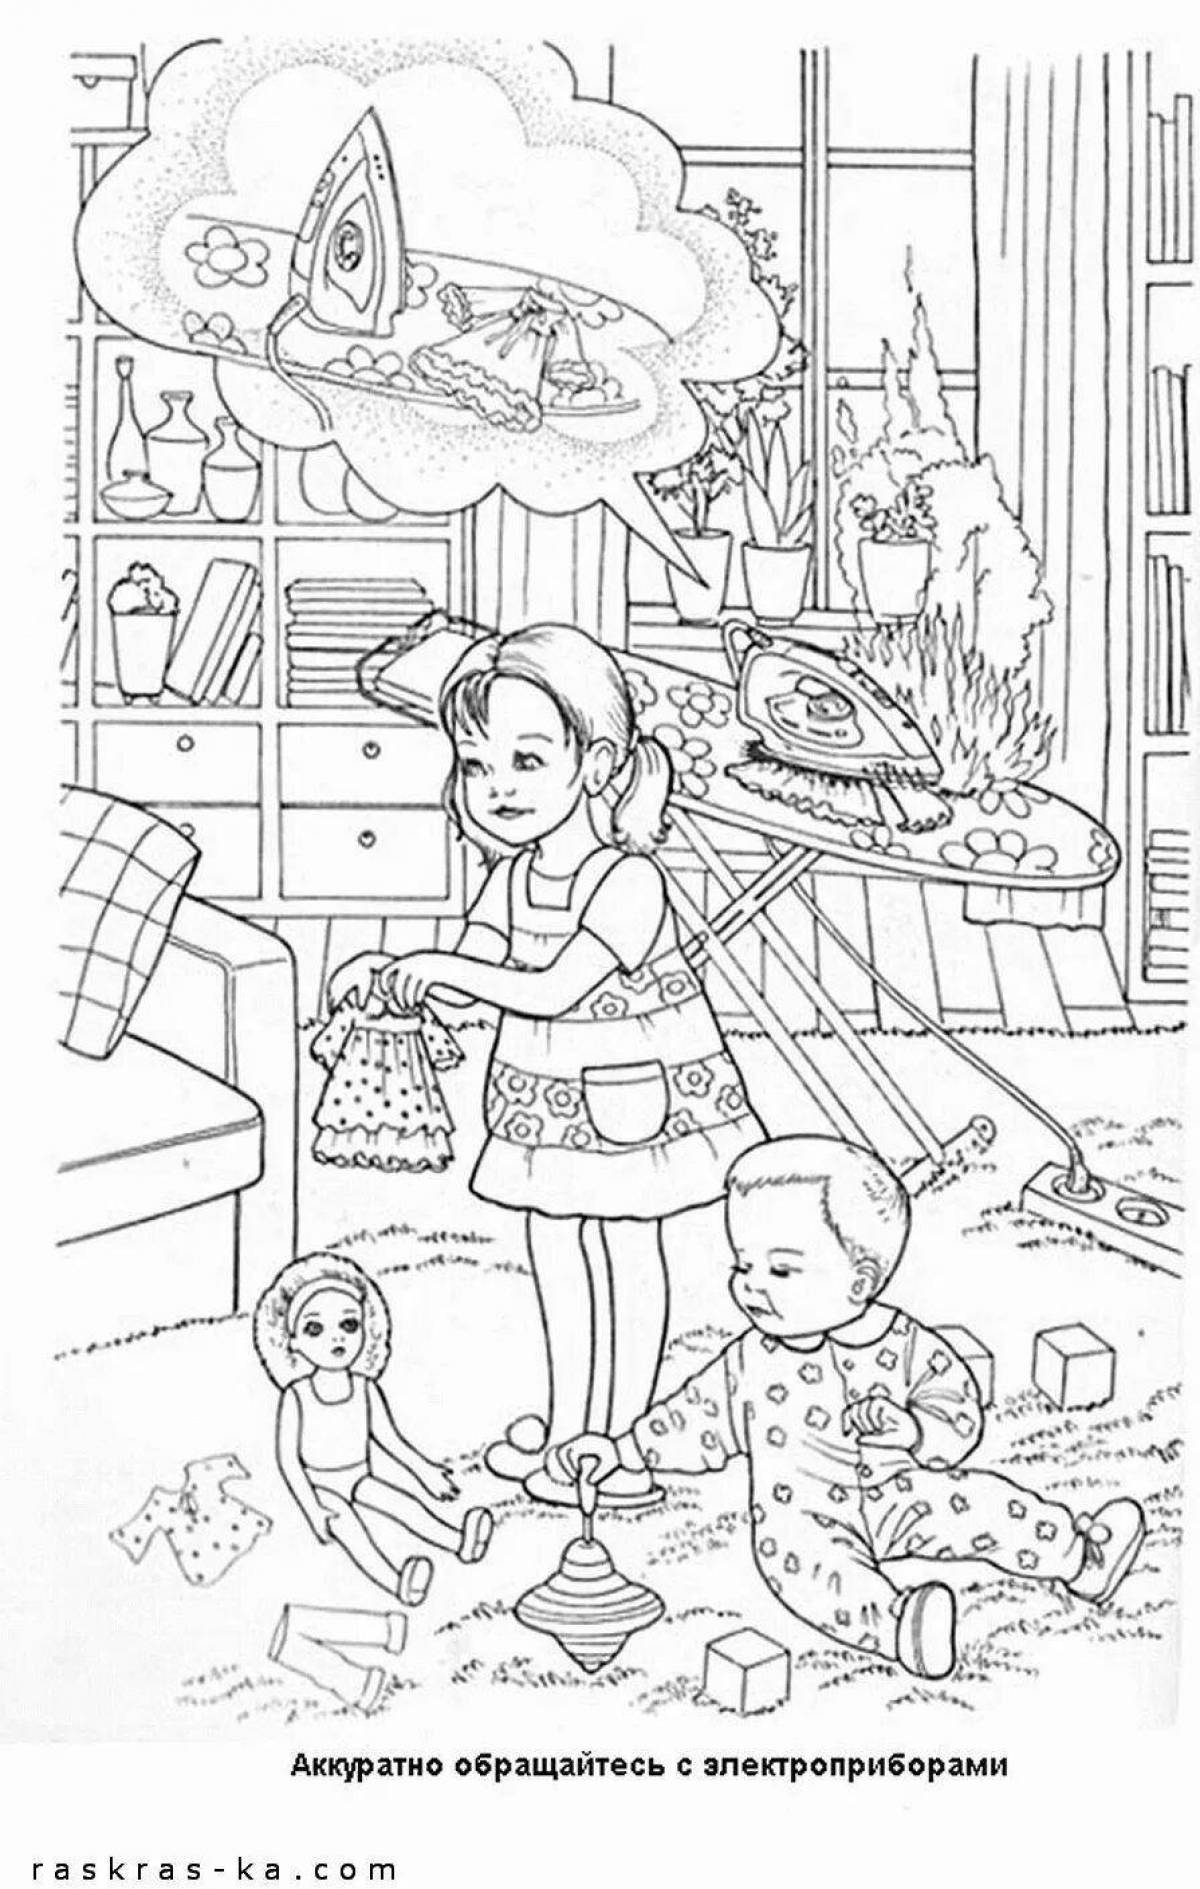 Fun safety rules coloring page